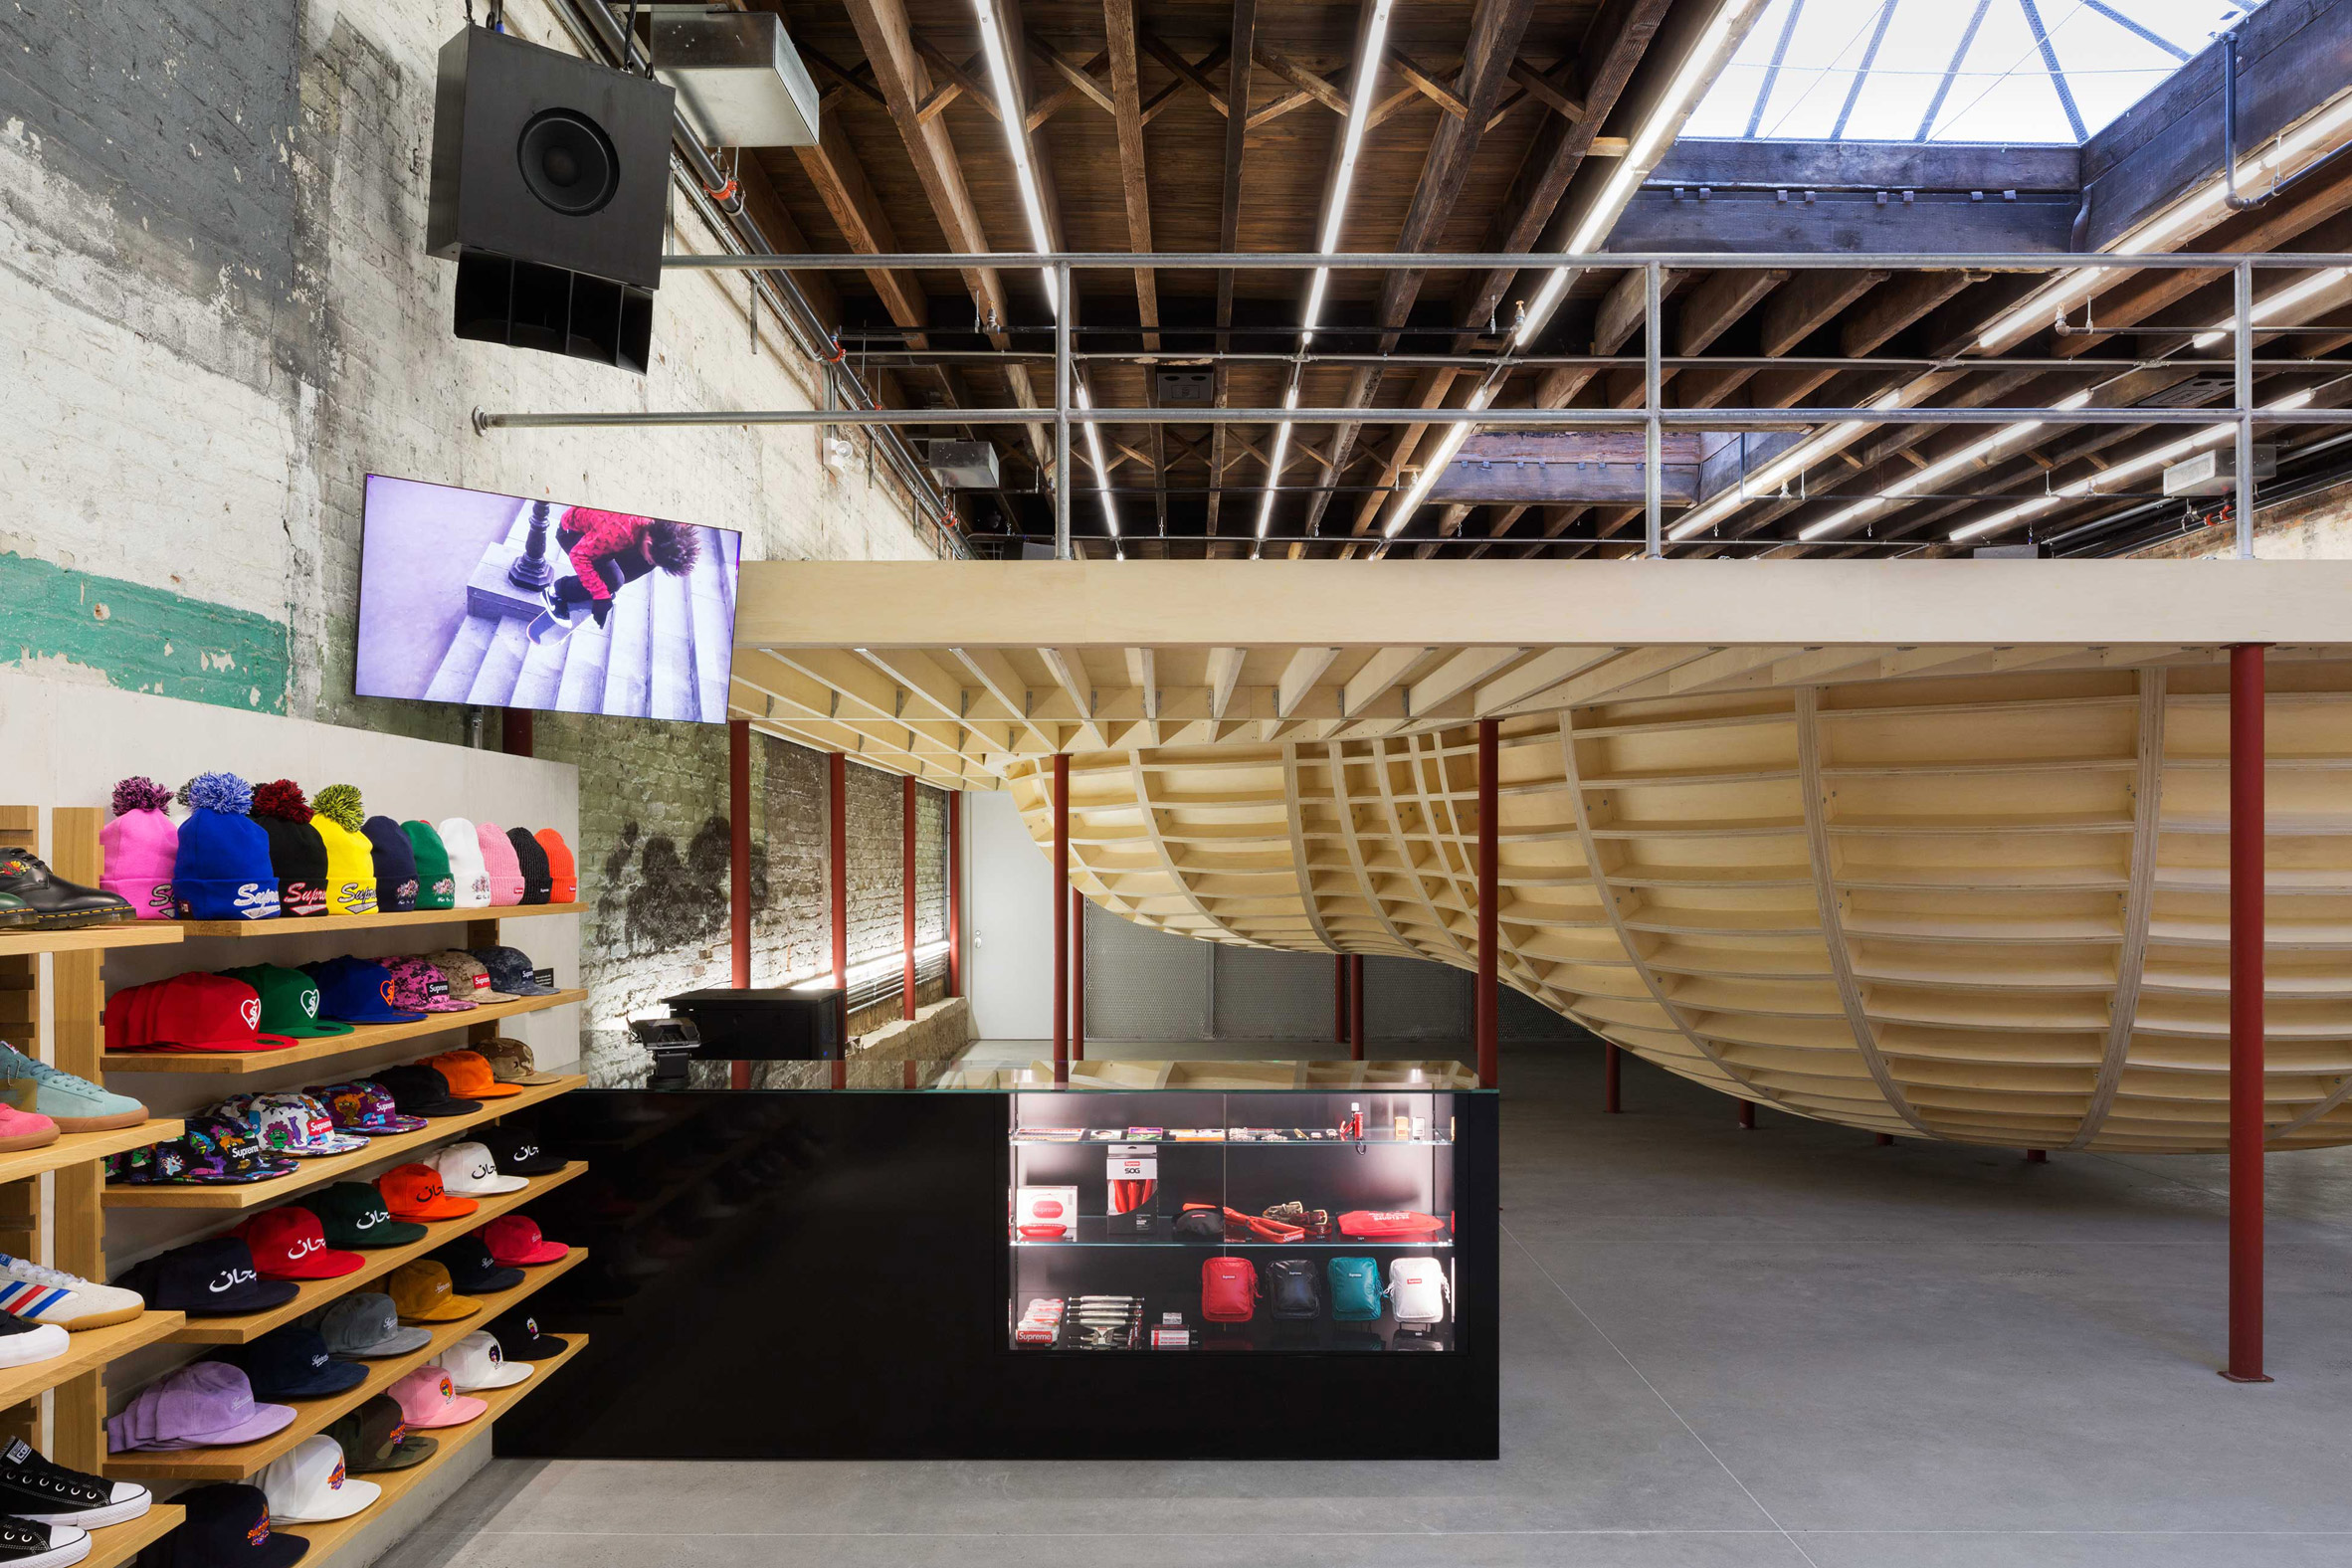 Supreme is opening a Brooklyn store – with its own skateboard bowl